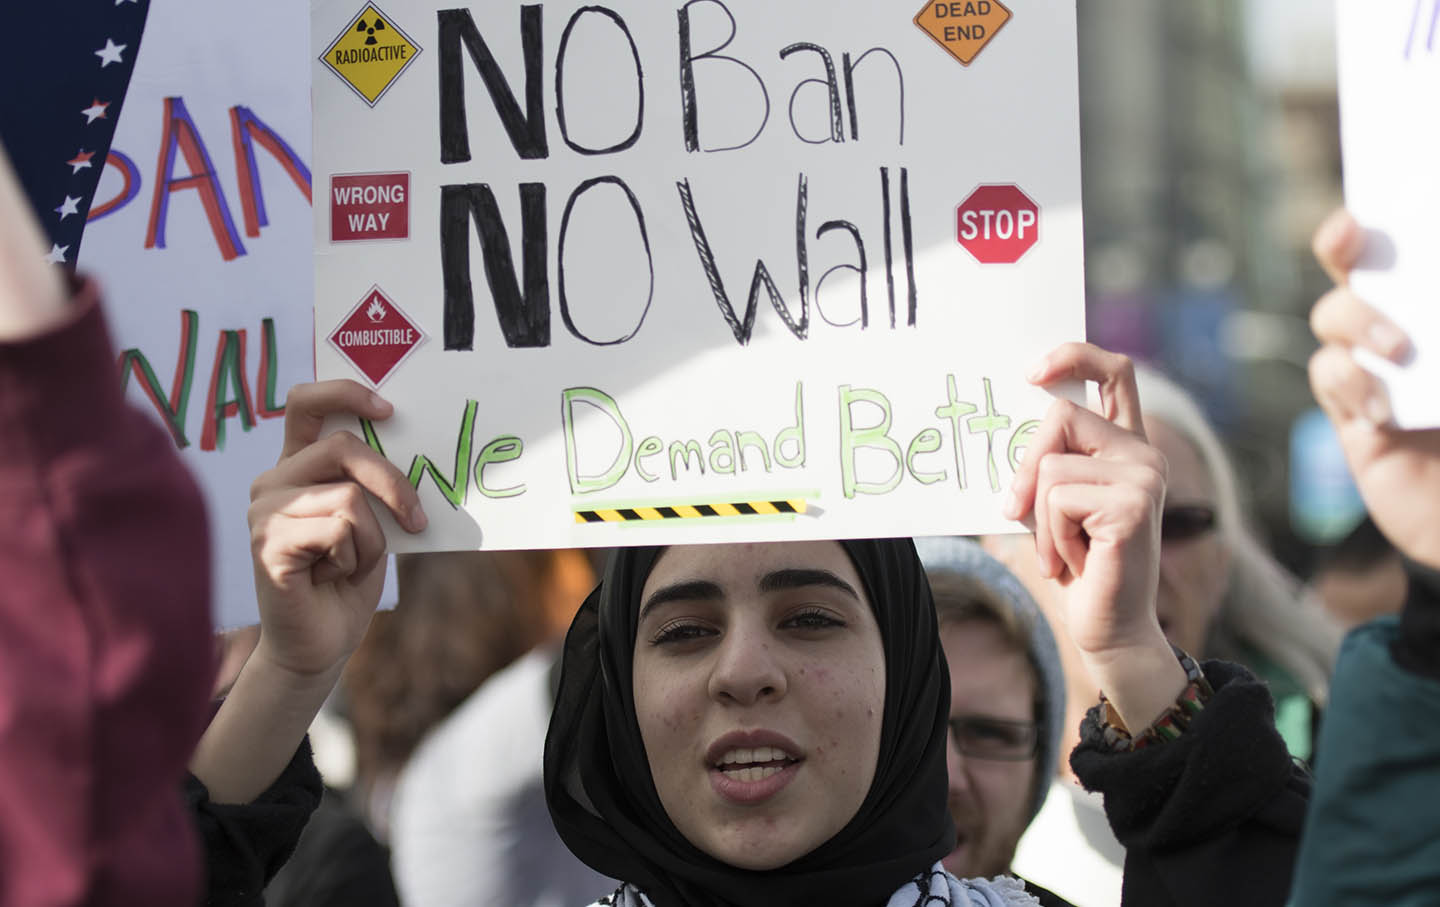 With Trump’s Latest Muslim Ban Blocked, Take Action to Defeat It for Good